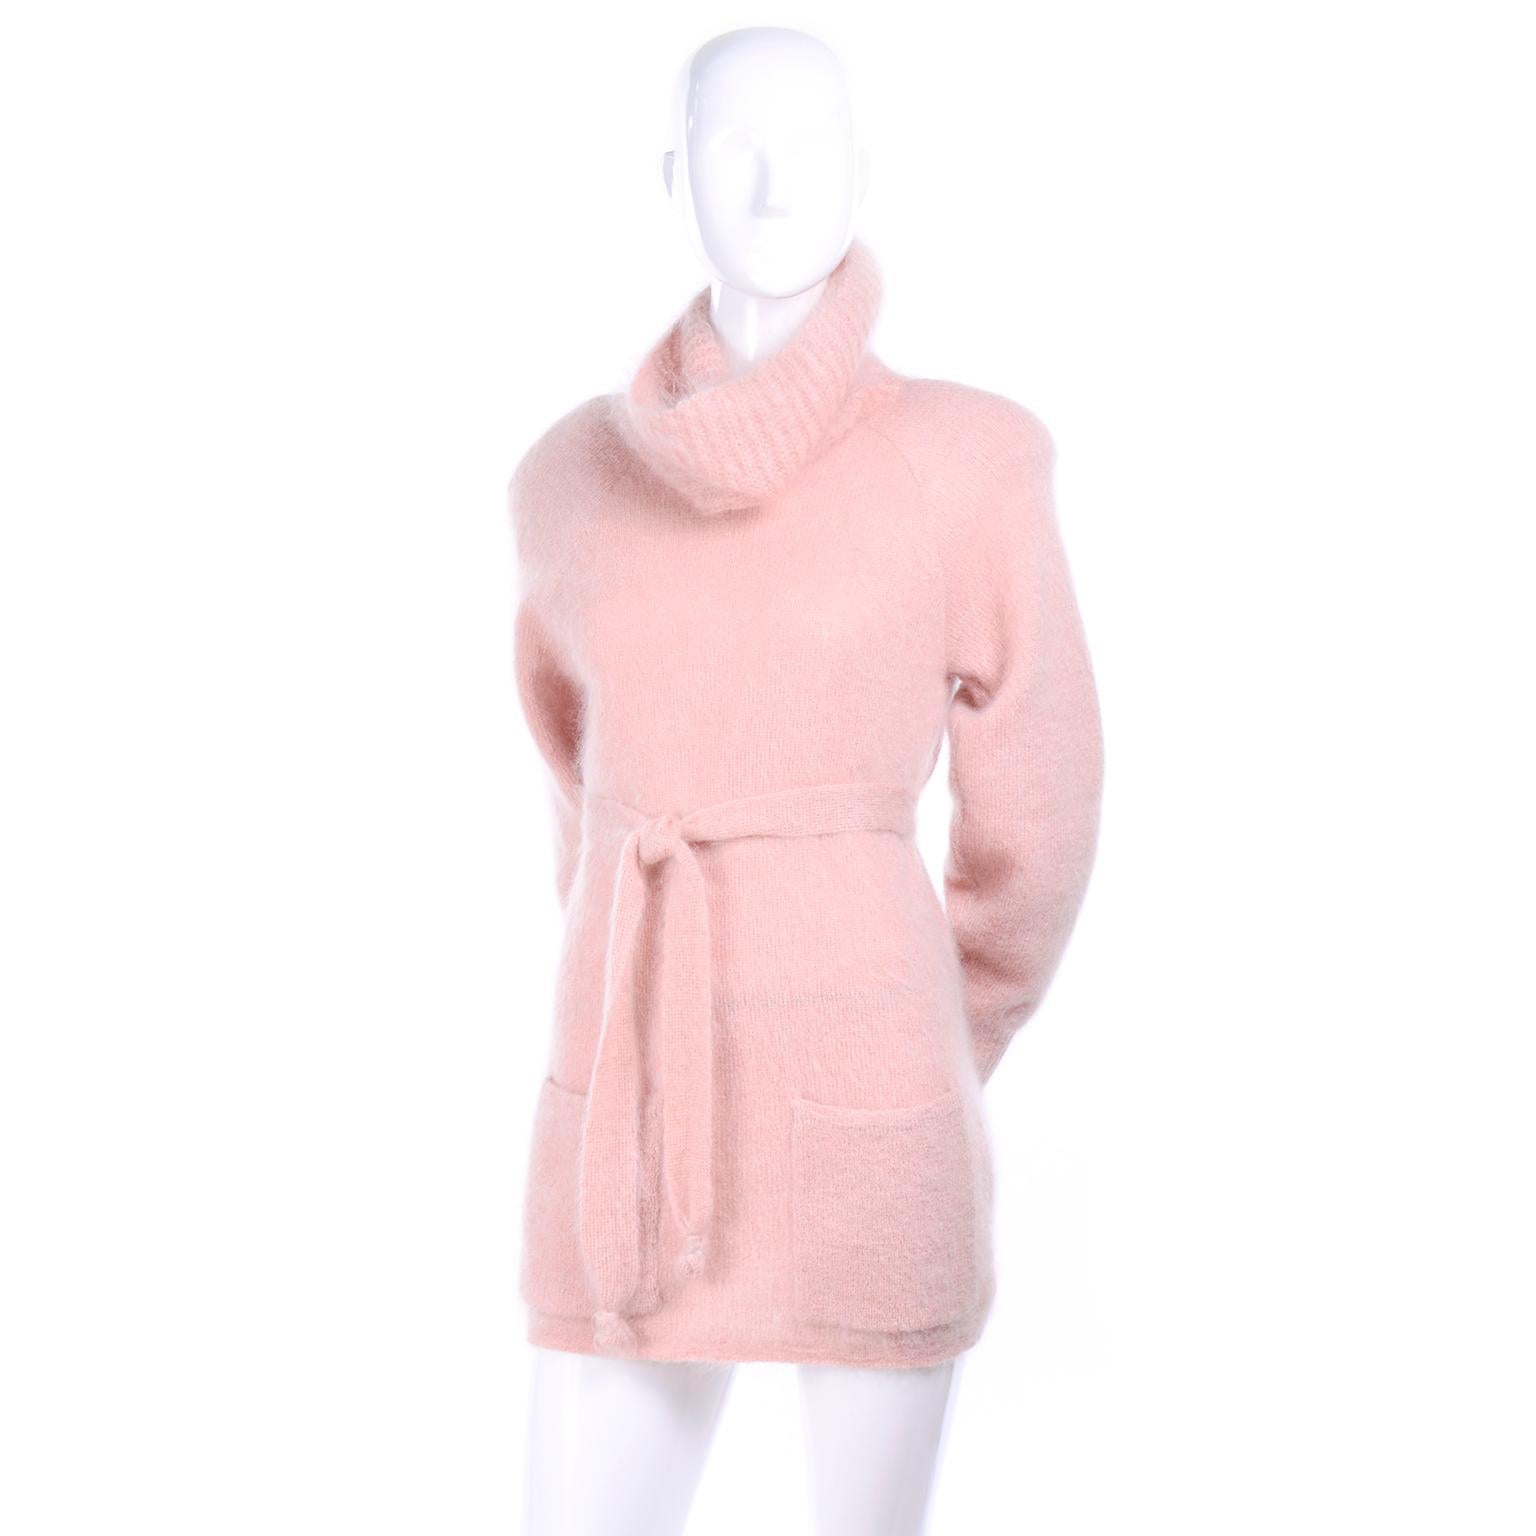 This is a lovely vintage Anne Klein fuzzy pink Sweater with a large cowl neck, belt and front pockets.  The sweater has shoulder pads and is 80% mohair and 20% nylon and was made in Italy in the 1970's. We acquired this sweater from the estate of a